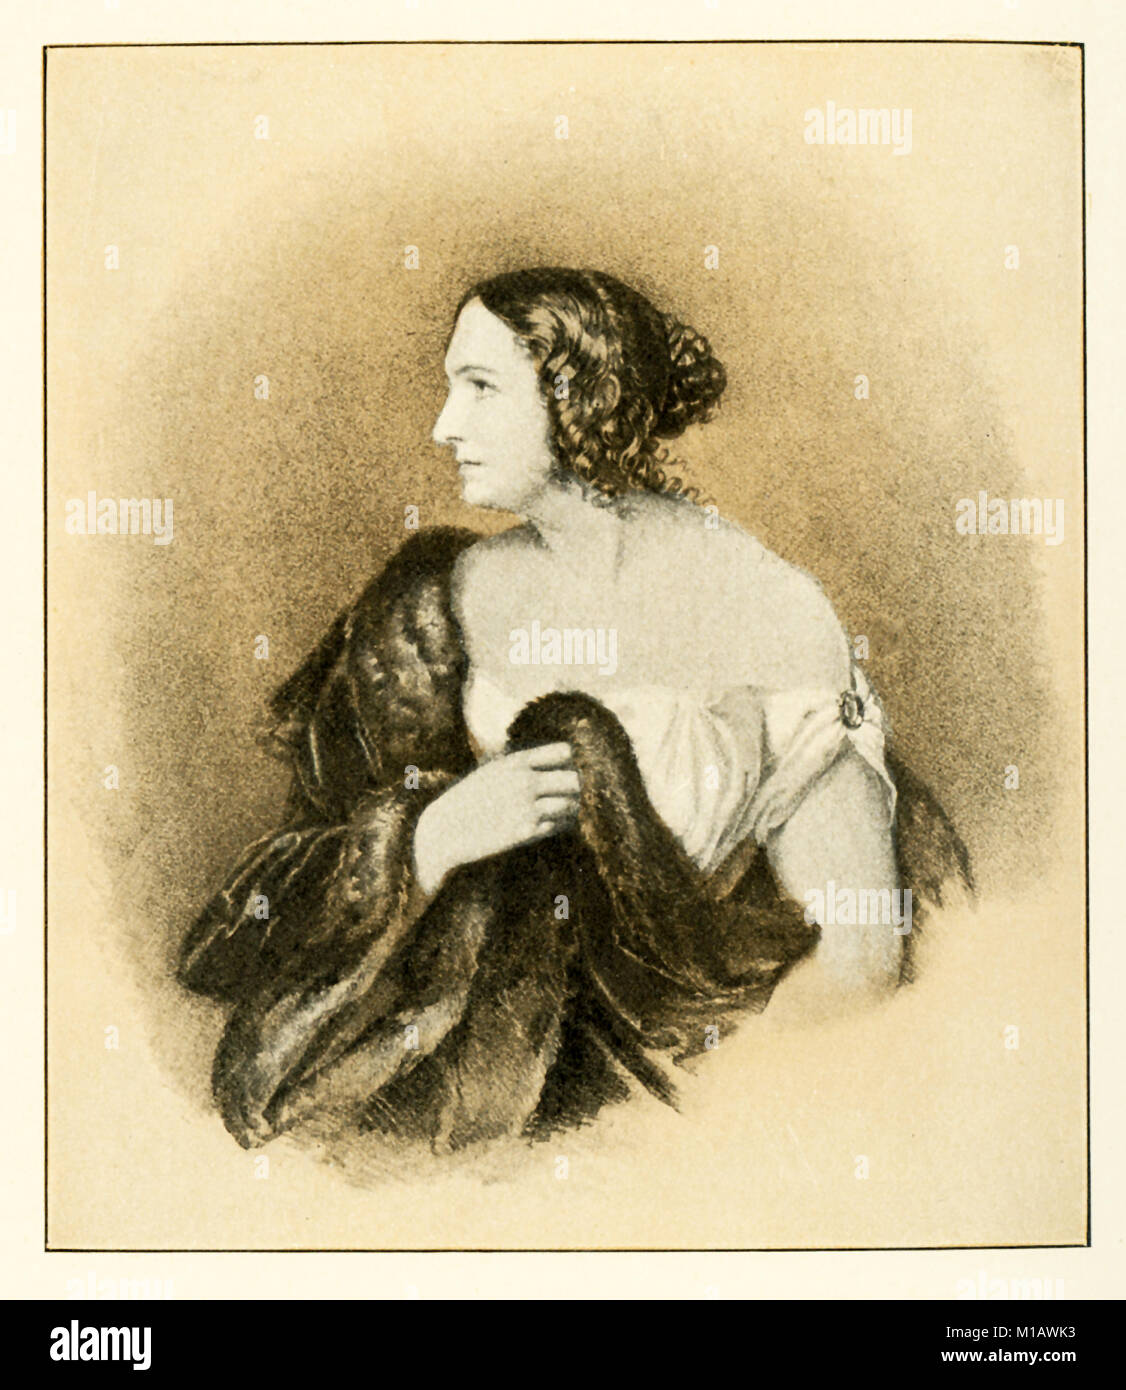 Wilhelmina Schroeder-Devrient (1804-1860) was one of the great dramatic singers and operatic tragediennces. Her greatest fame and triumph followed her appearance in Fidelio, her conception of which, was thoroughly approved of, even by the composer, Beethoven. She was connected with Dresden Opera for 20 years. On good terms with composers, including Wagner. Greatest triumphs came in German opera and she did much to make it popular. Voice was a mellow soprano. Stock Photo